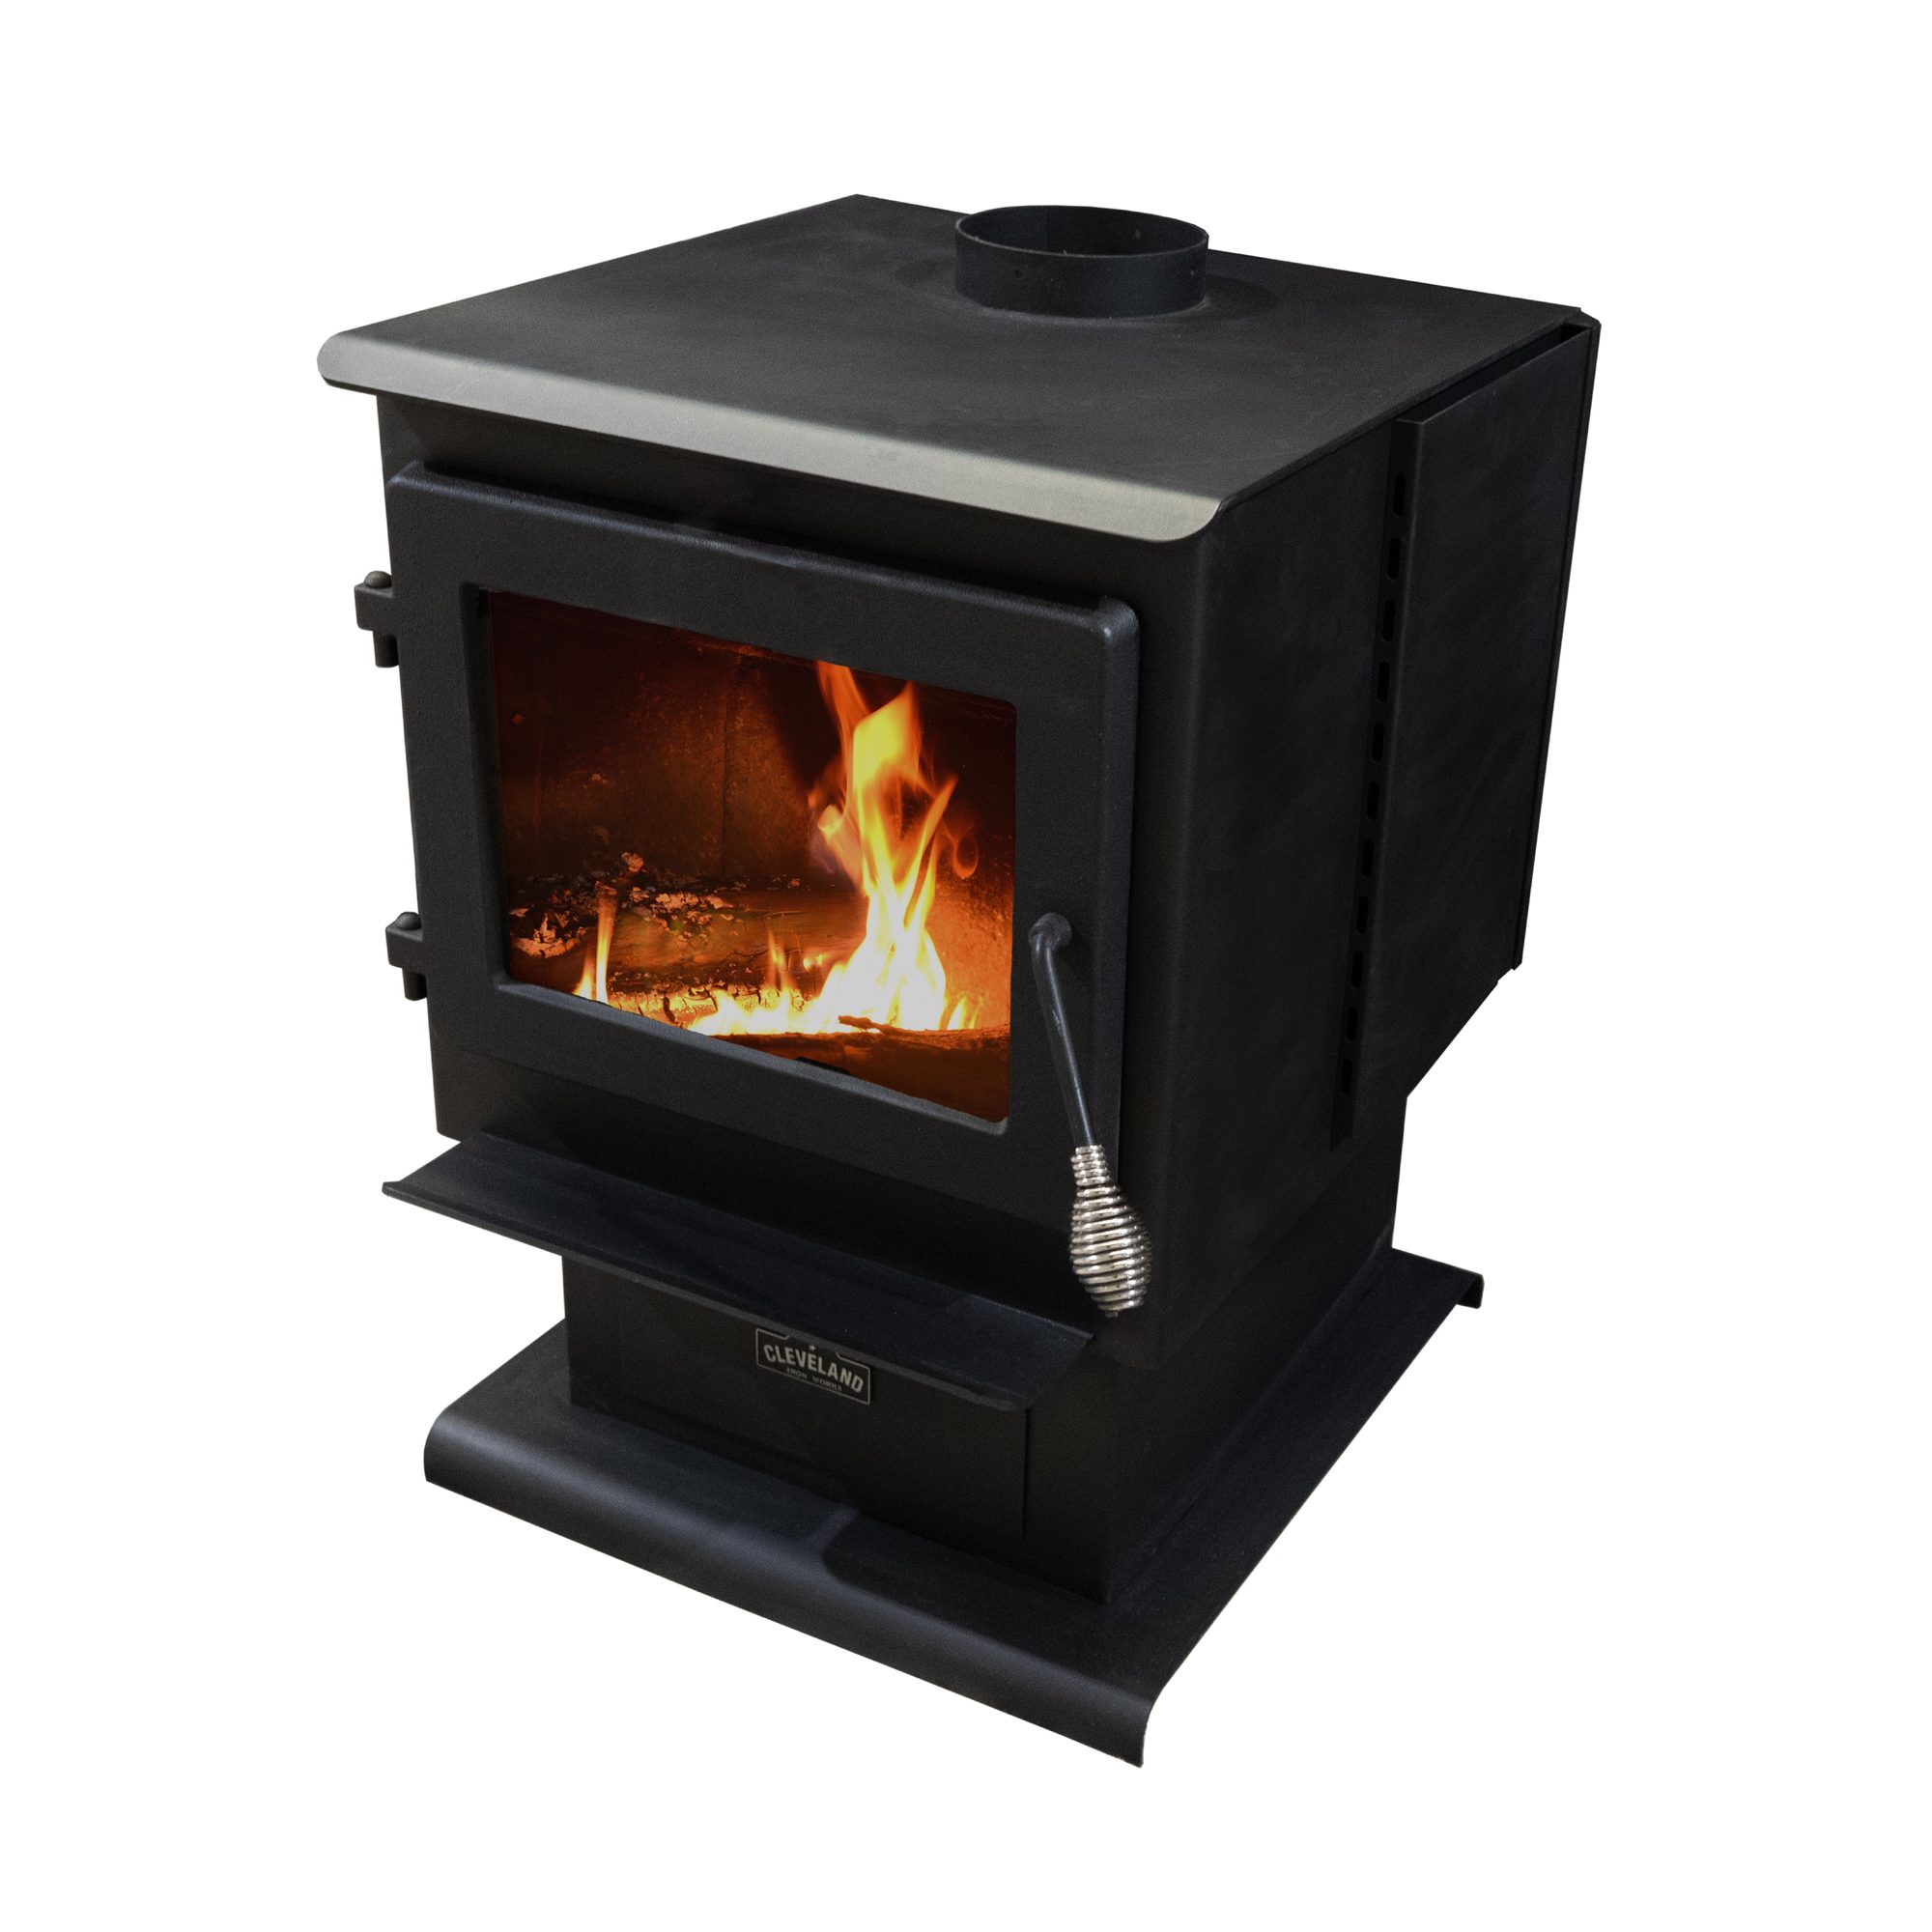 Cleveland Iron Works, Small Wood Stove, Heat Output 10000 Btu/hour, Heating Capability 2000 ftÂ², Color Family Black, Model F500105